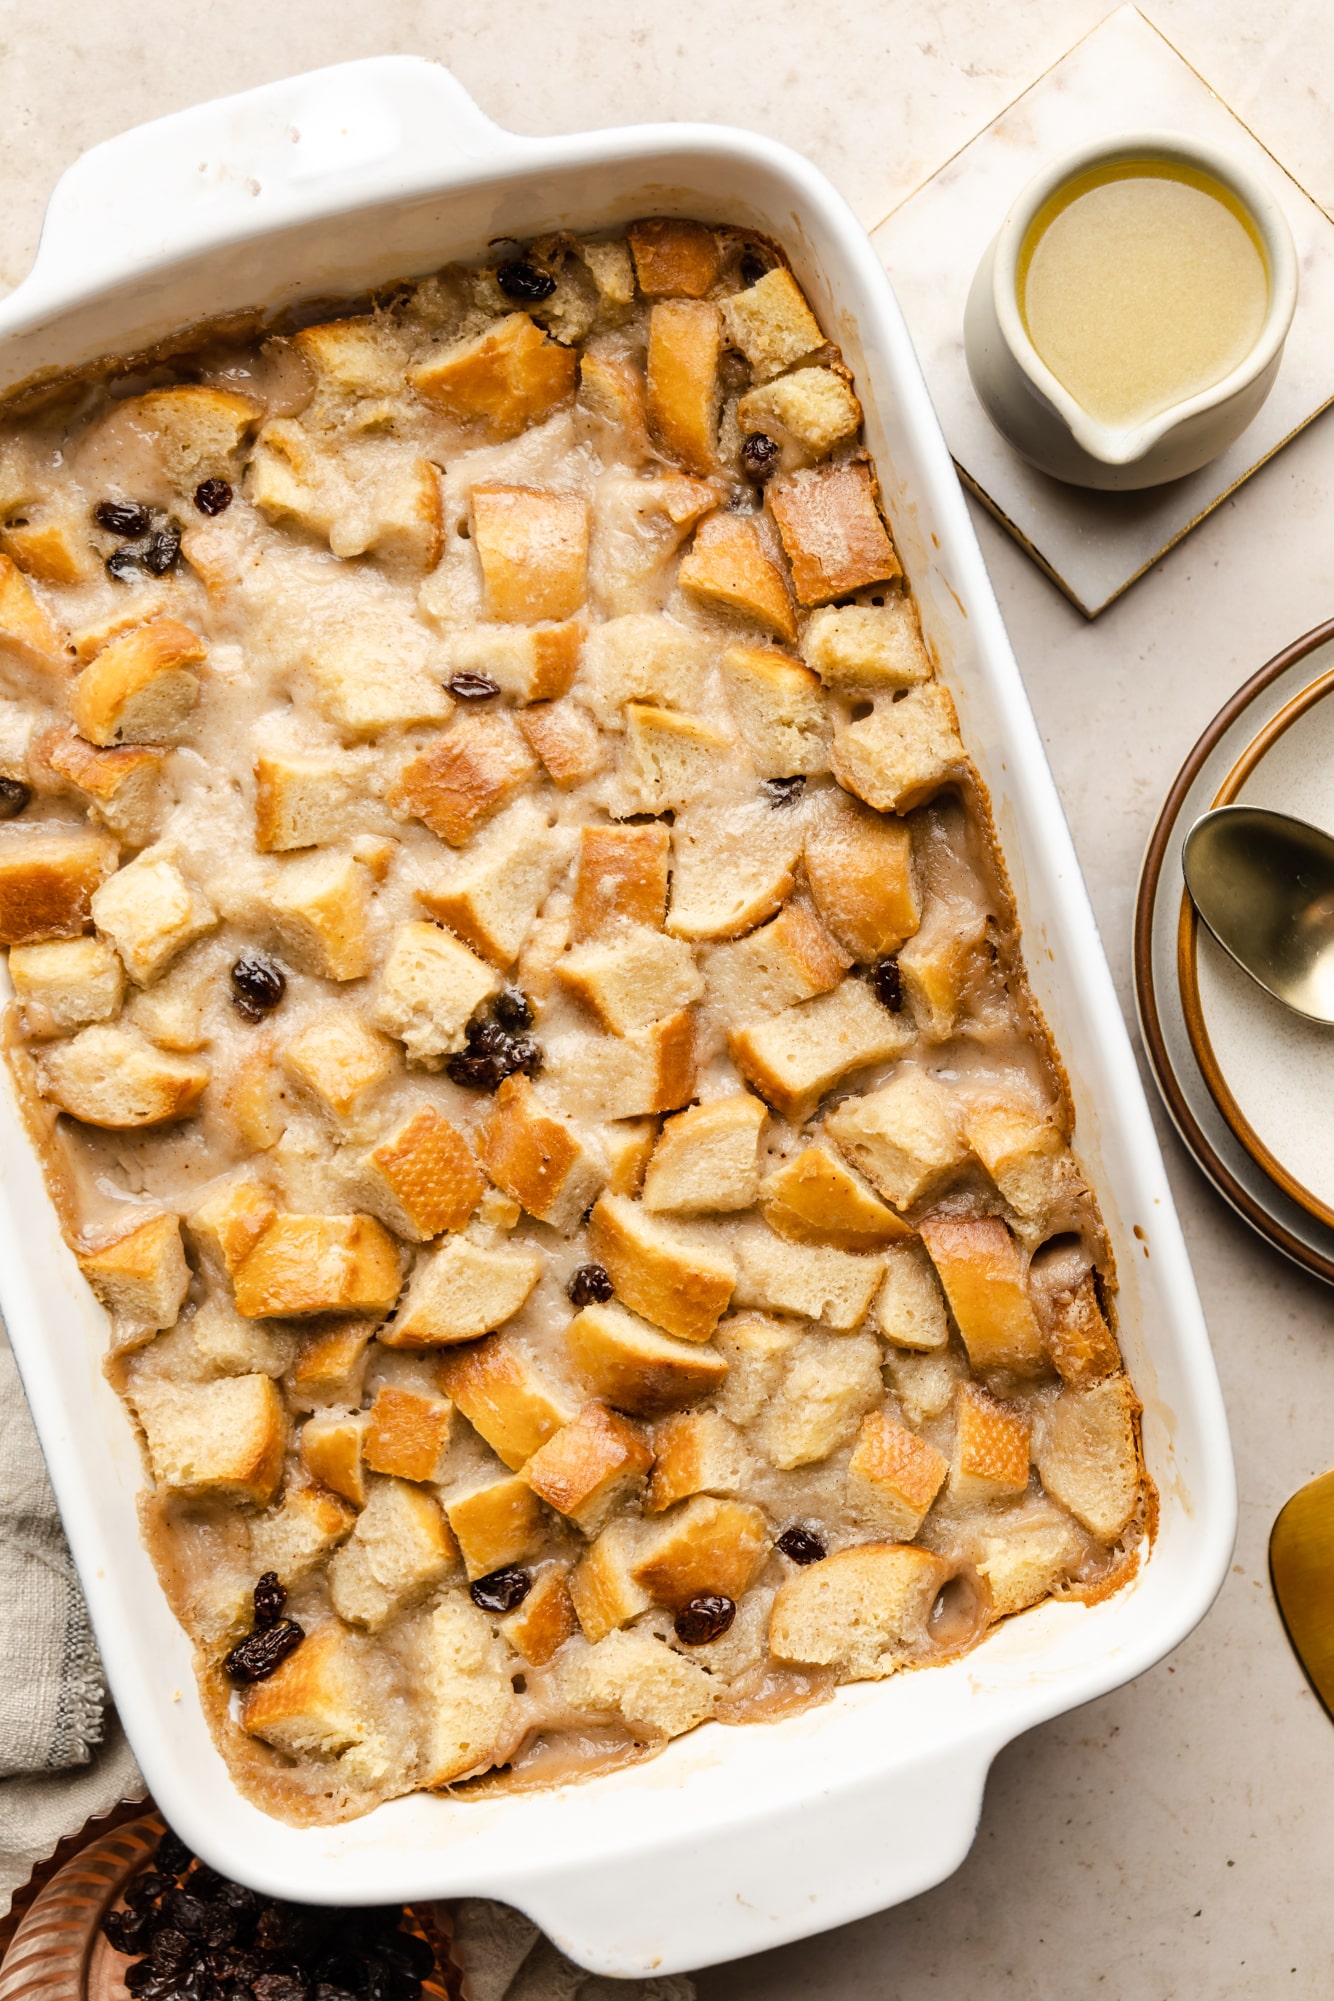 baked vegan bread pudding in a white baking dish.